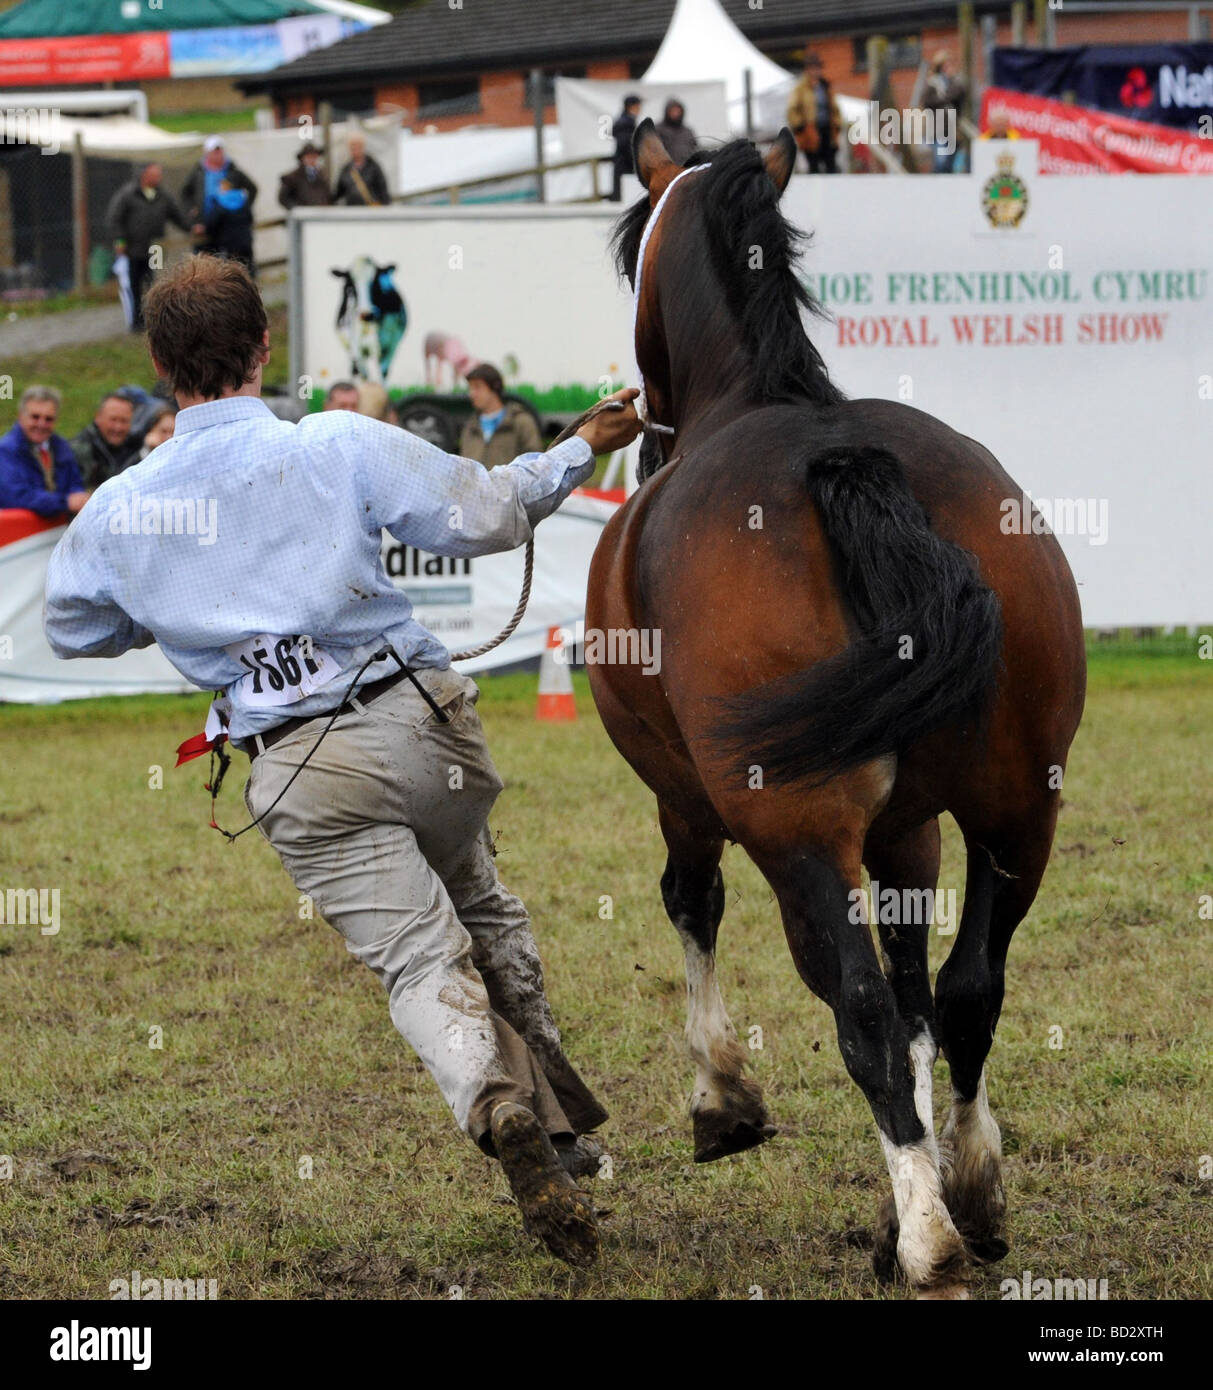 RWS Royal Welsh Show 2009 3 year old mare winner Stock Photo